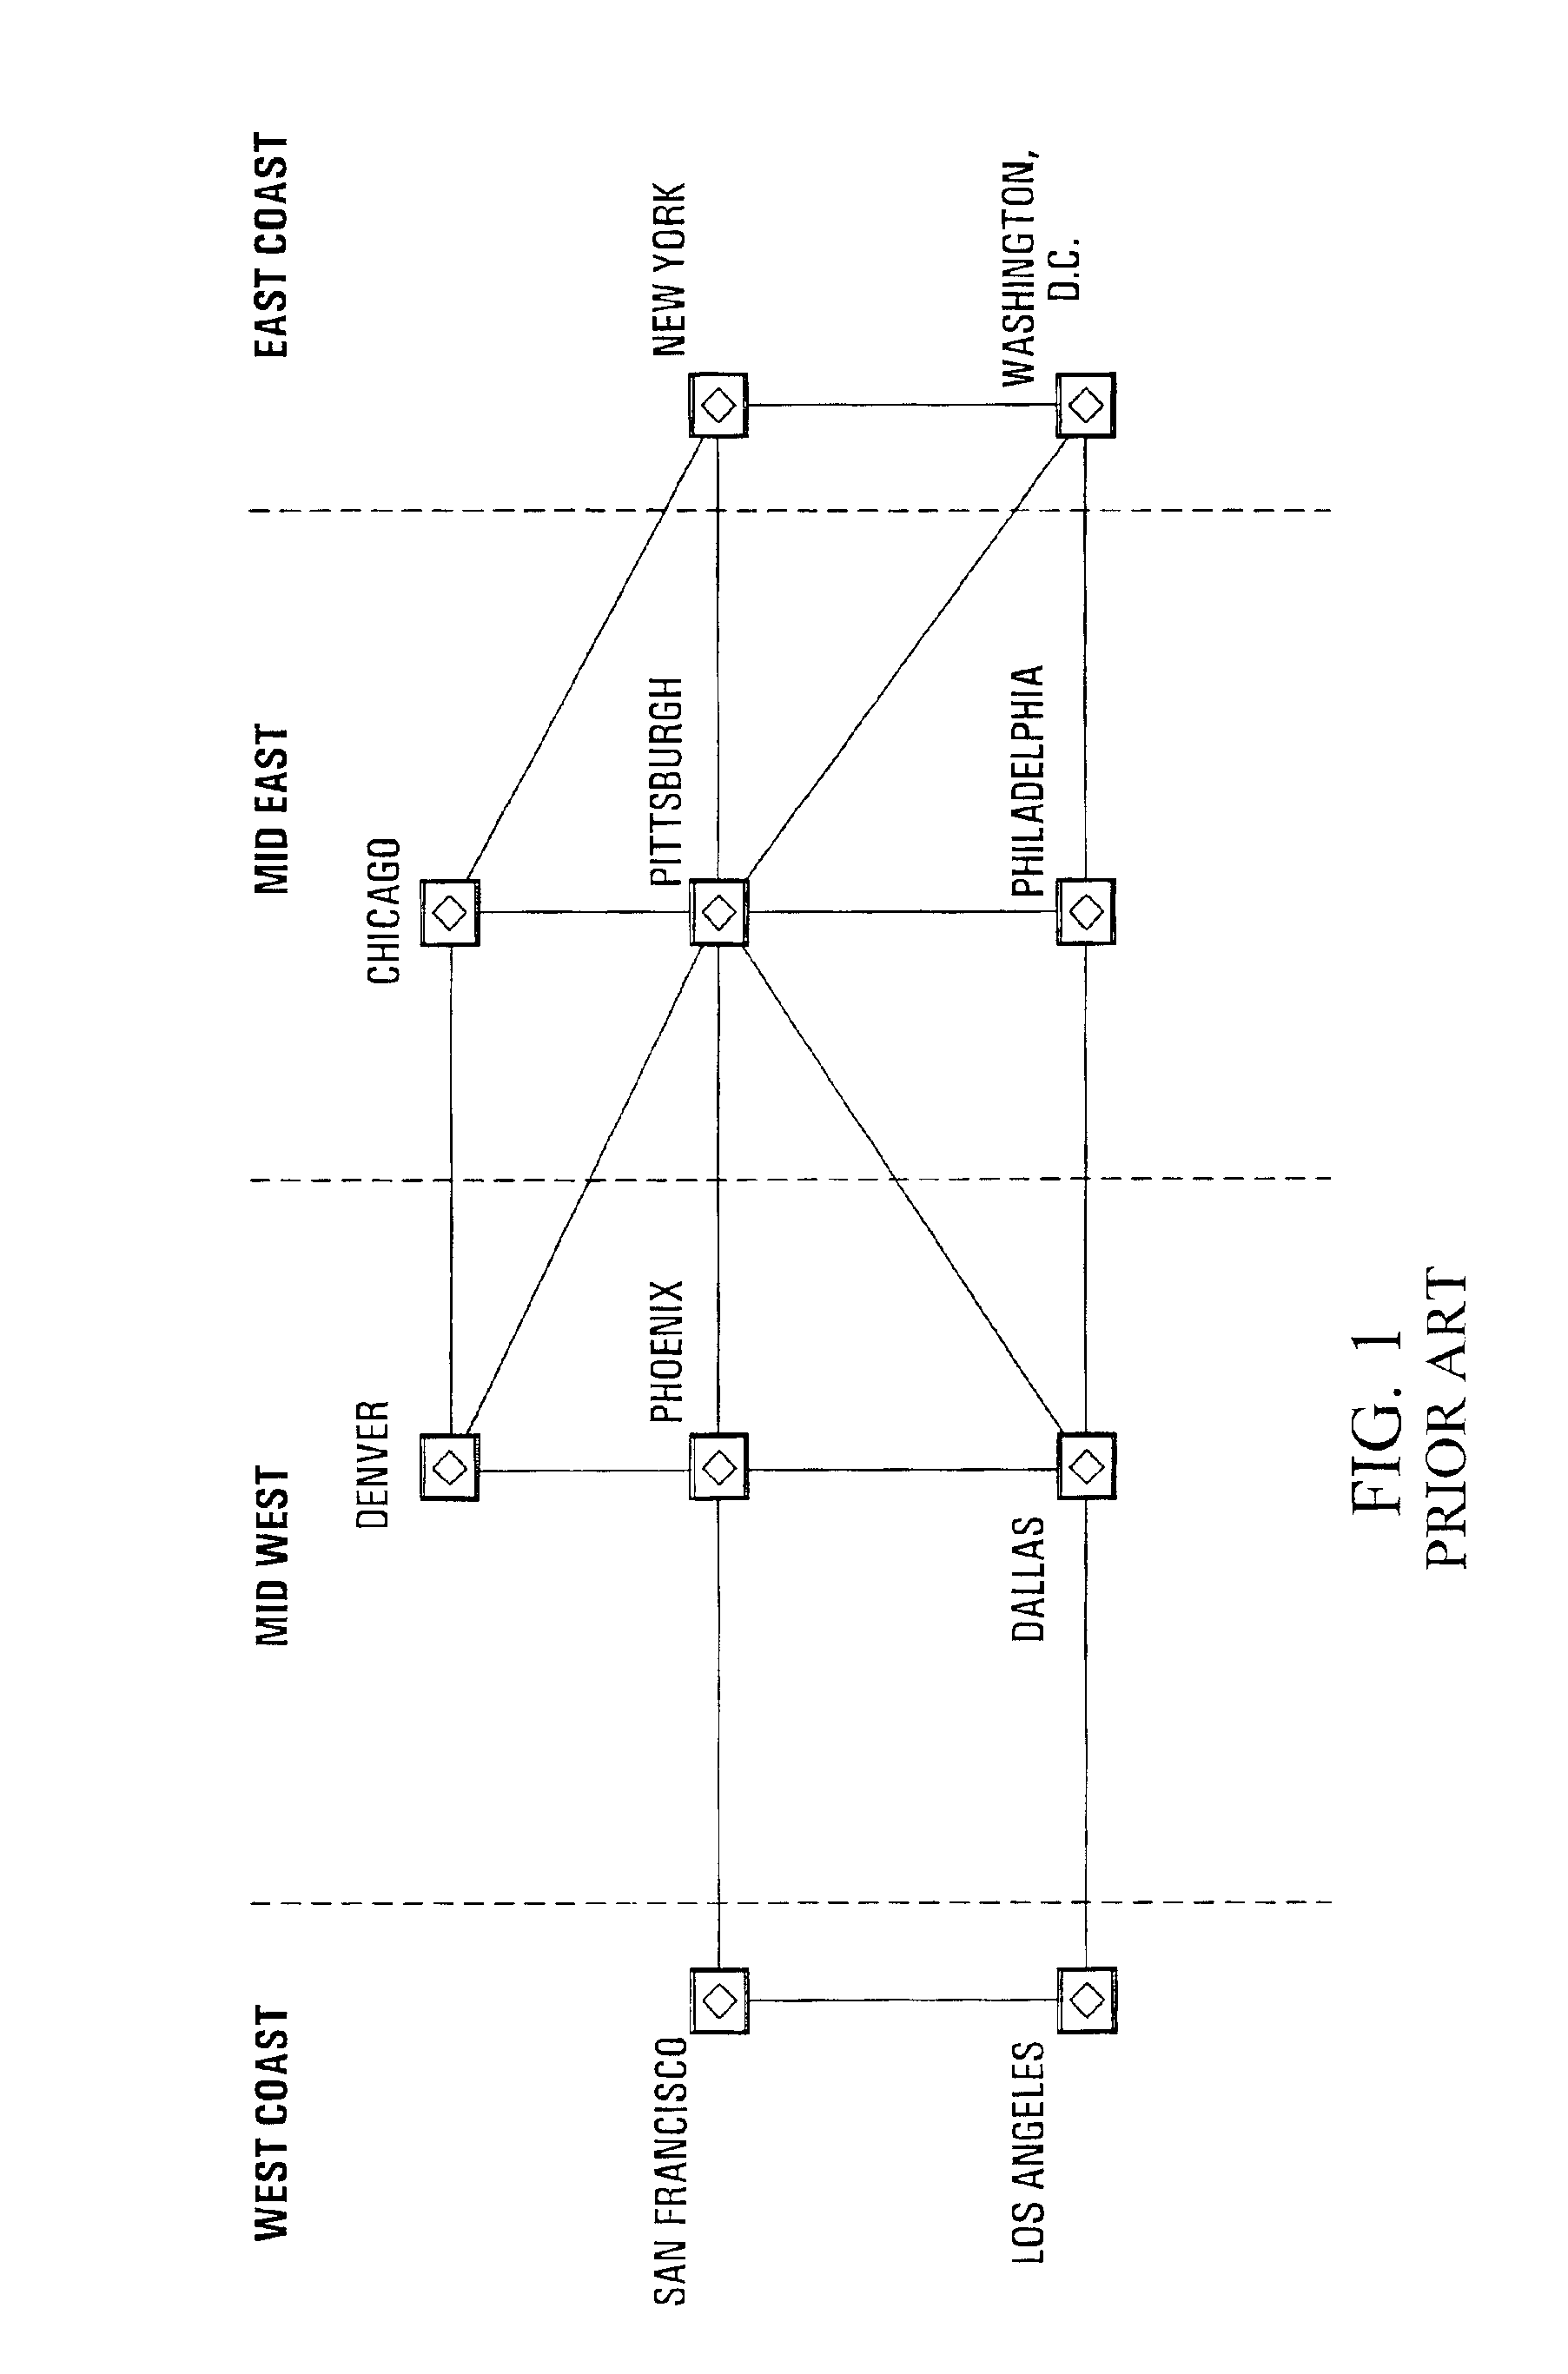 Method of displaying nodes and links